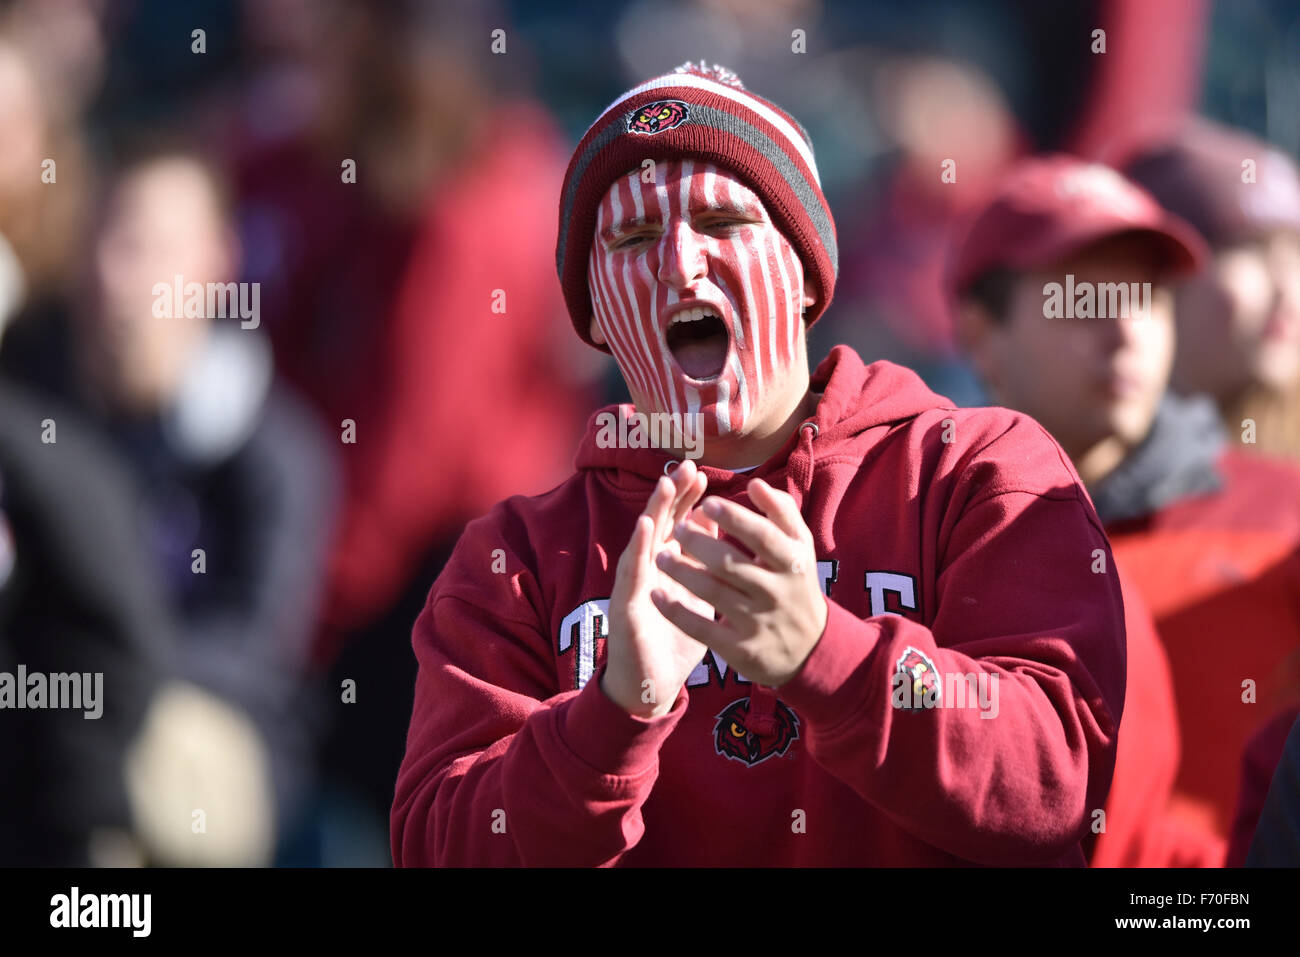 Philadelphia, Pennsylvania, USA. 21st Nov, 2015. A Tempe Owls fan cheers on his team during the American Athletic Conference football game at Lincoln Financial Field. The Owls beat the Tigers 31-12. © Ken Inness/ZUMA Wire/Alamy Live News Stock Photo